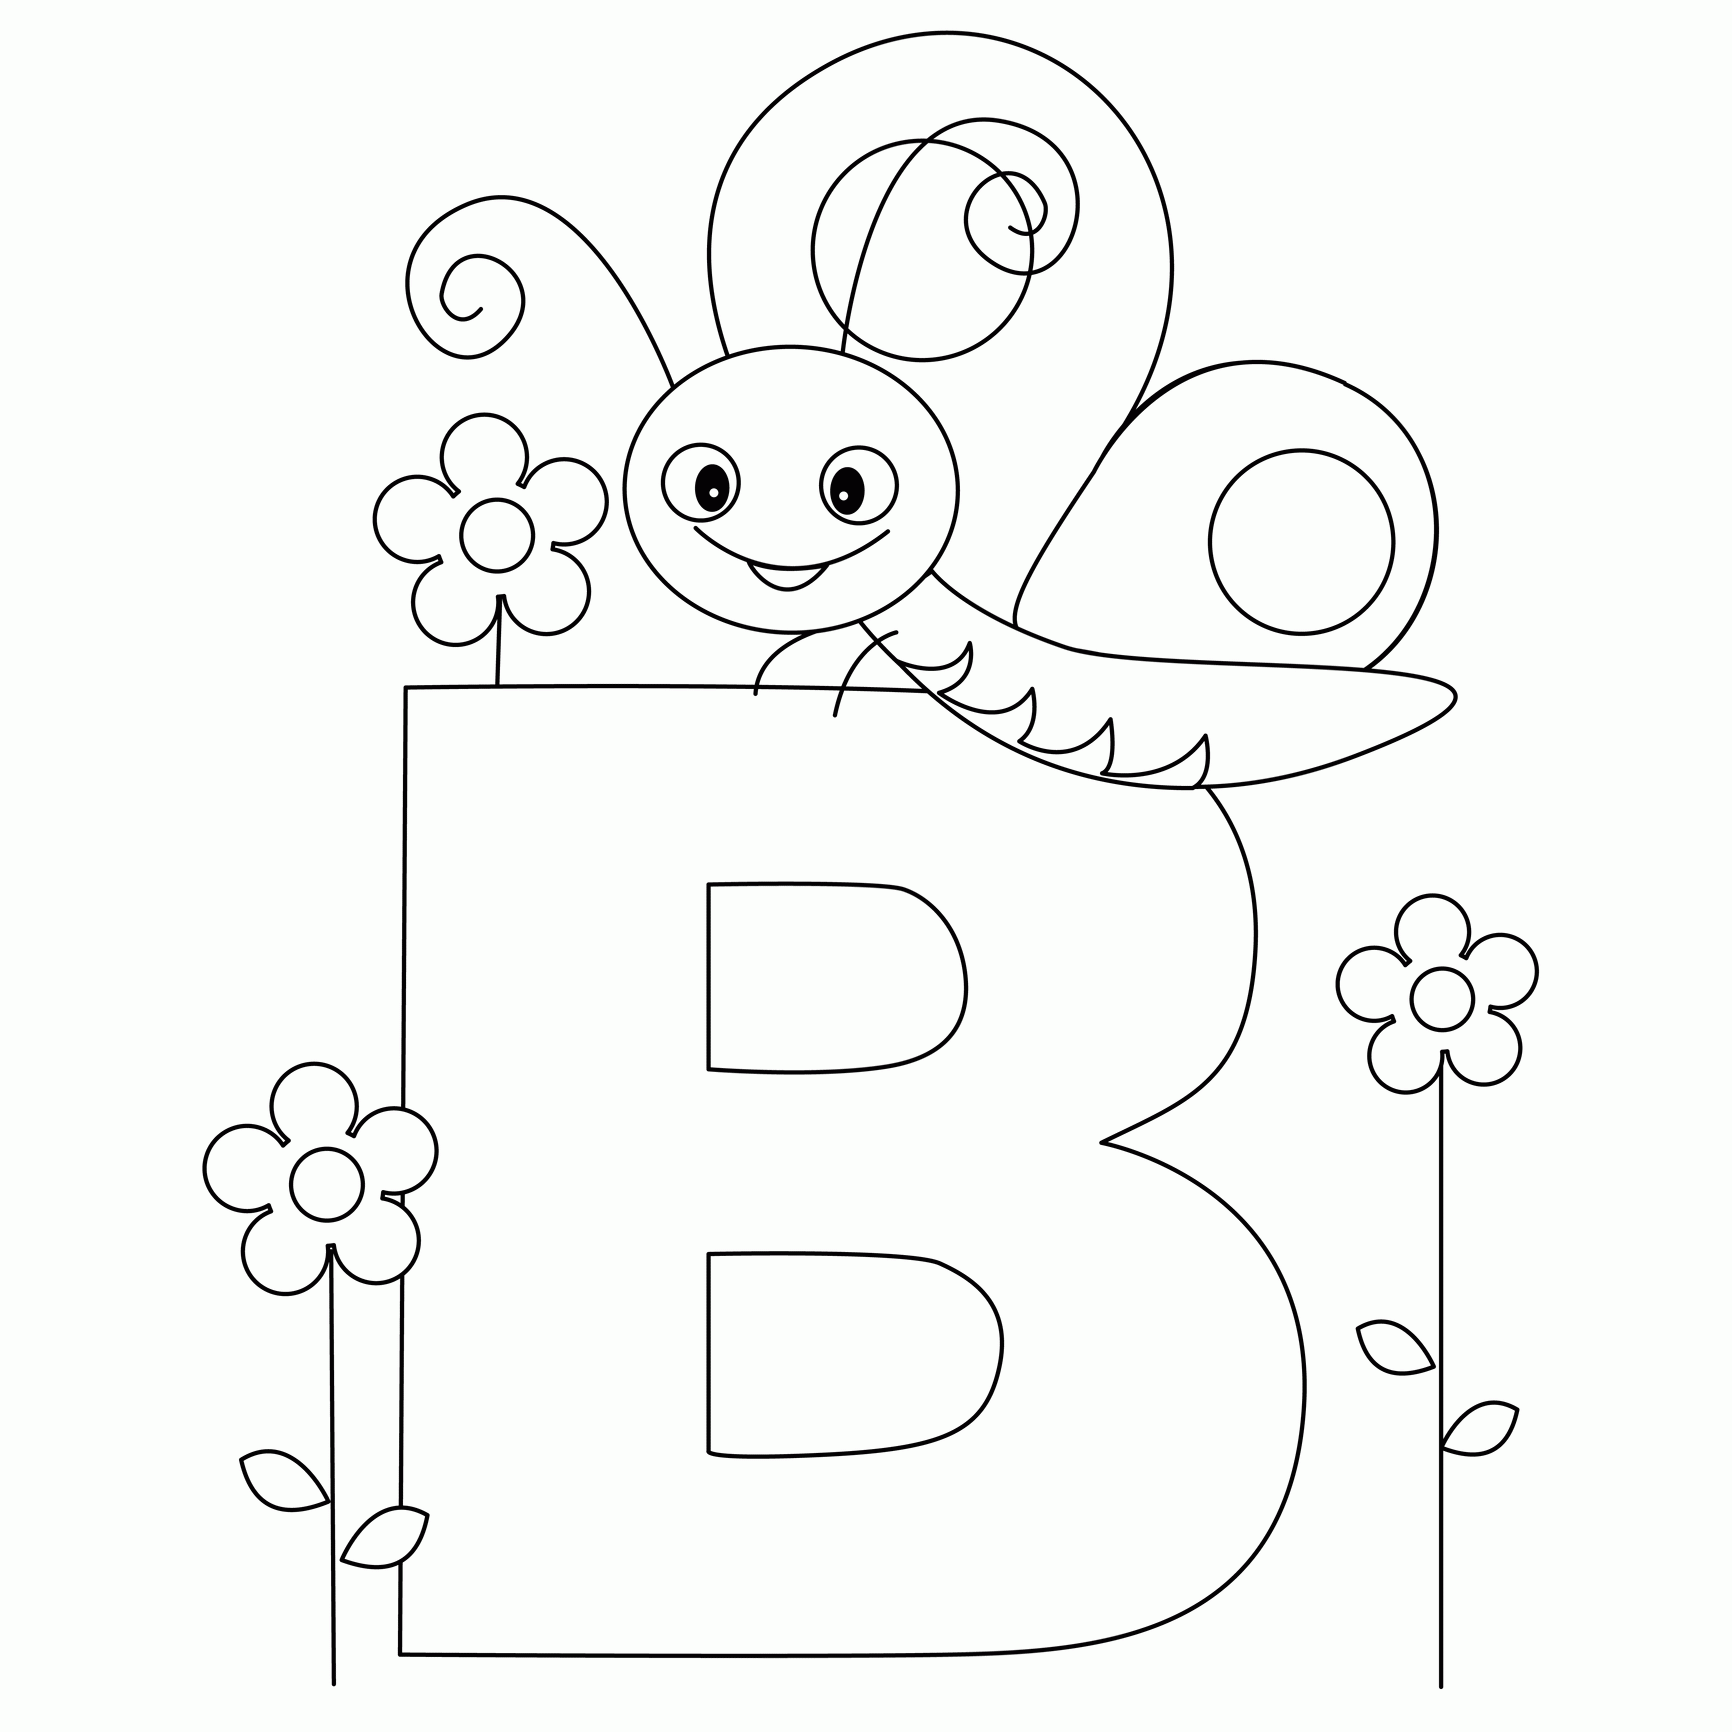 Animal Coloring Pages Abc - Coloring Pages For All Ages - Coloring Home